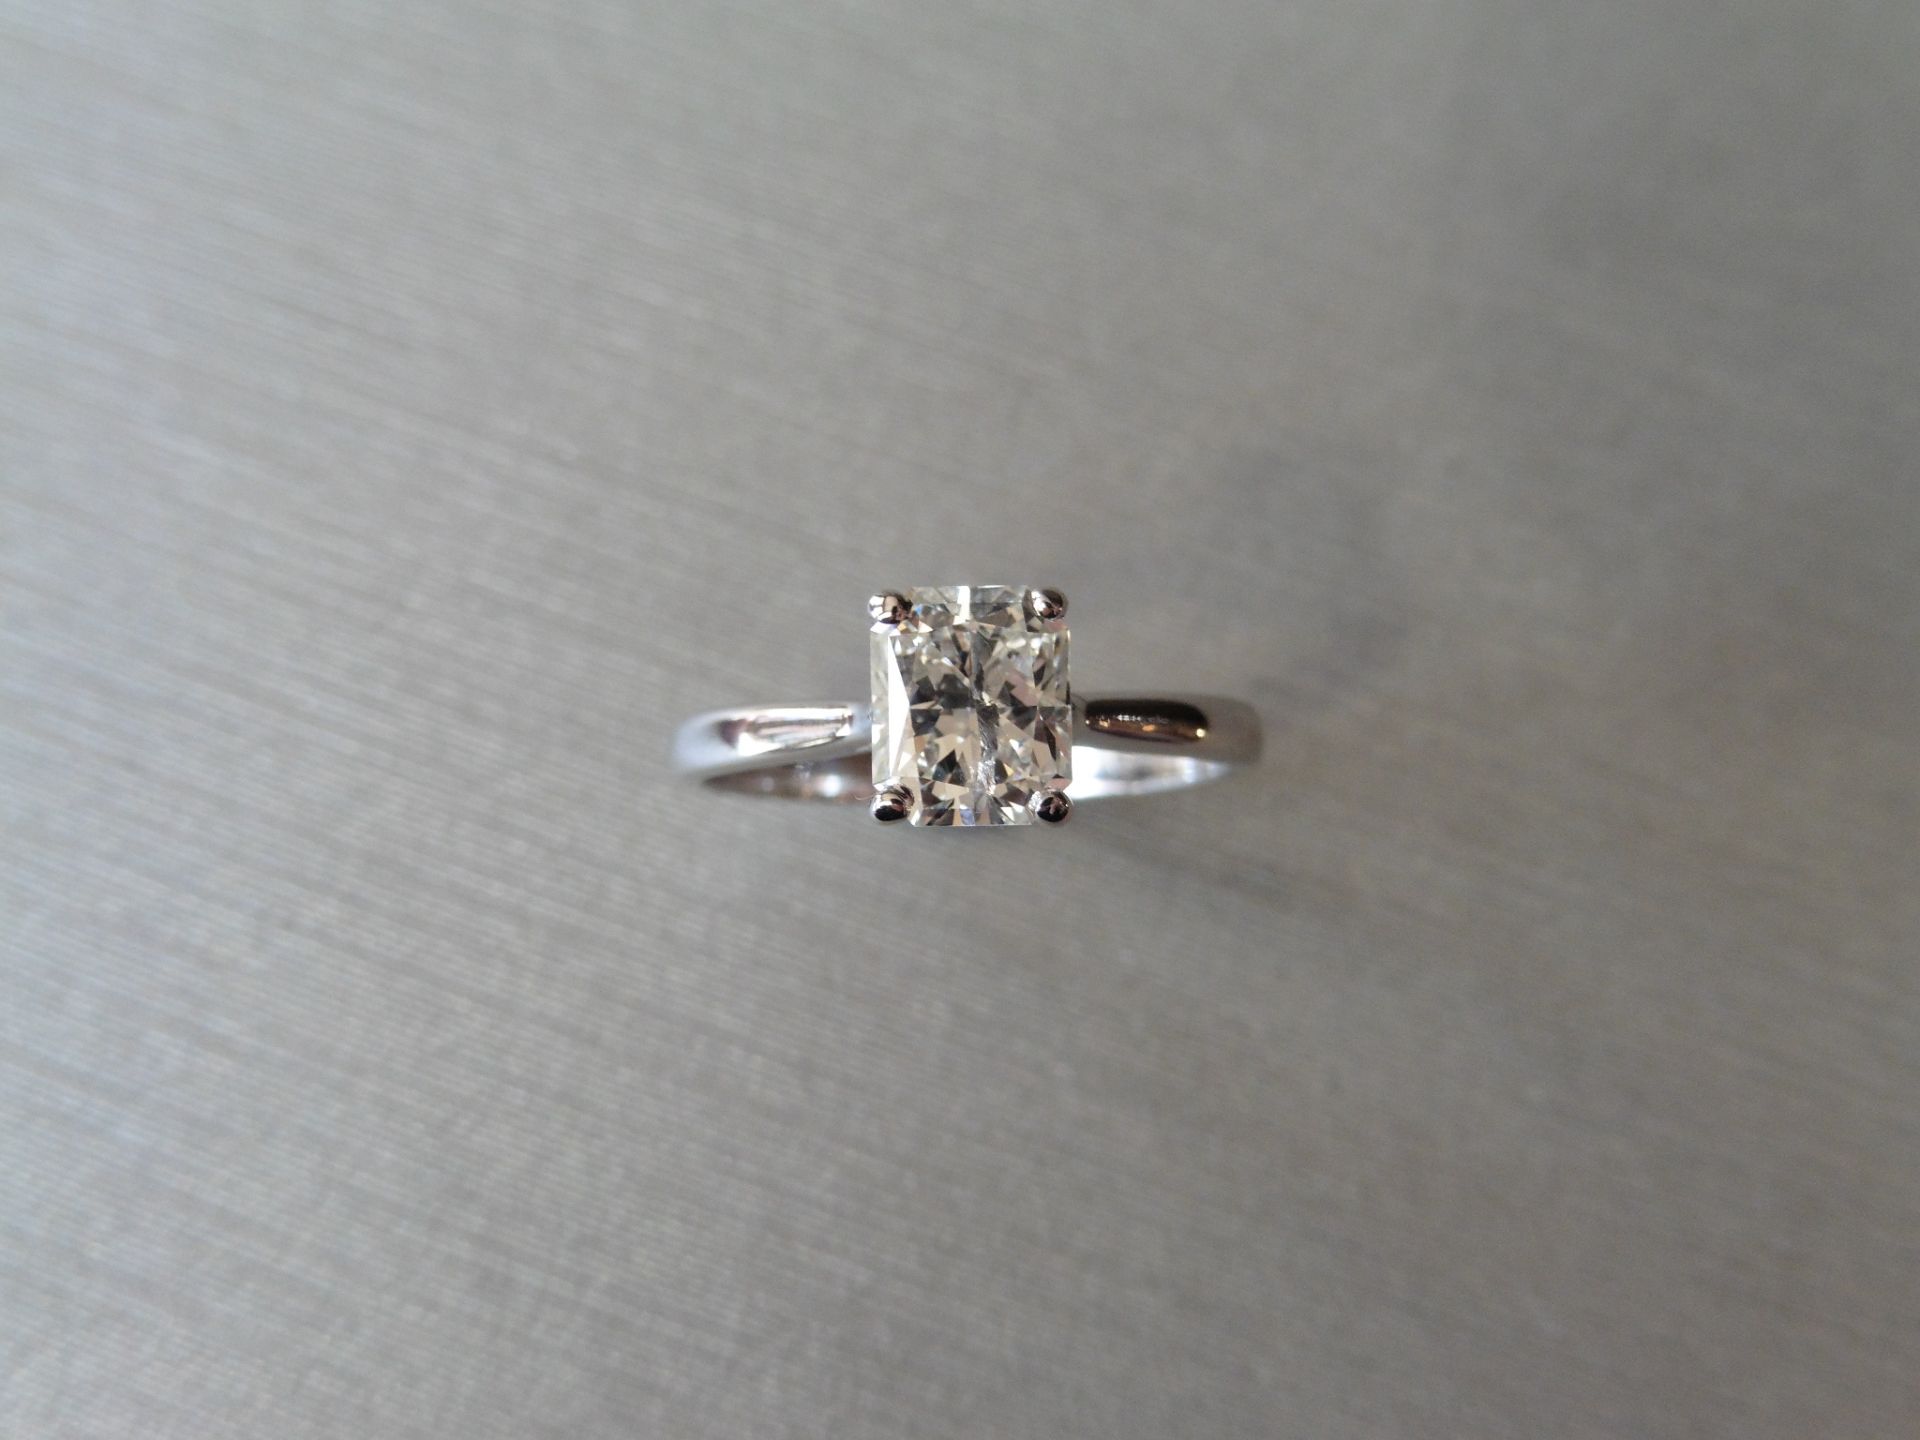 2.14ct Radiant cut diamond,si2 clarity I colour good cut,18ct white gold setting 3.8gms,size L, - Image 2 of 5